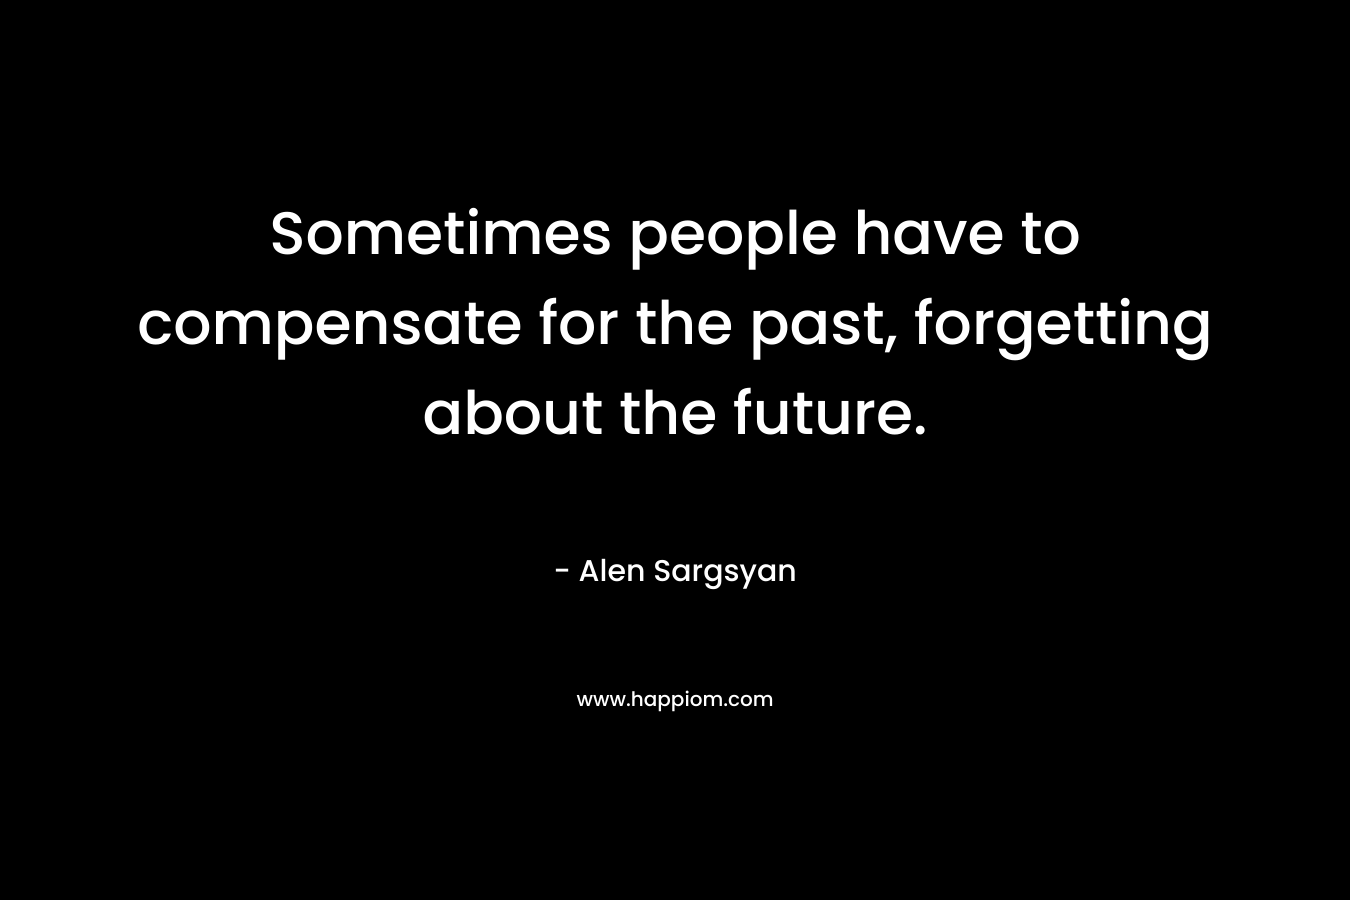 Sometimes people have to compensate for the past, forgetting about the future.